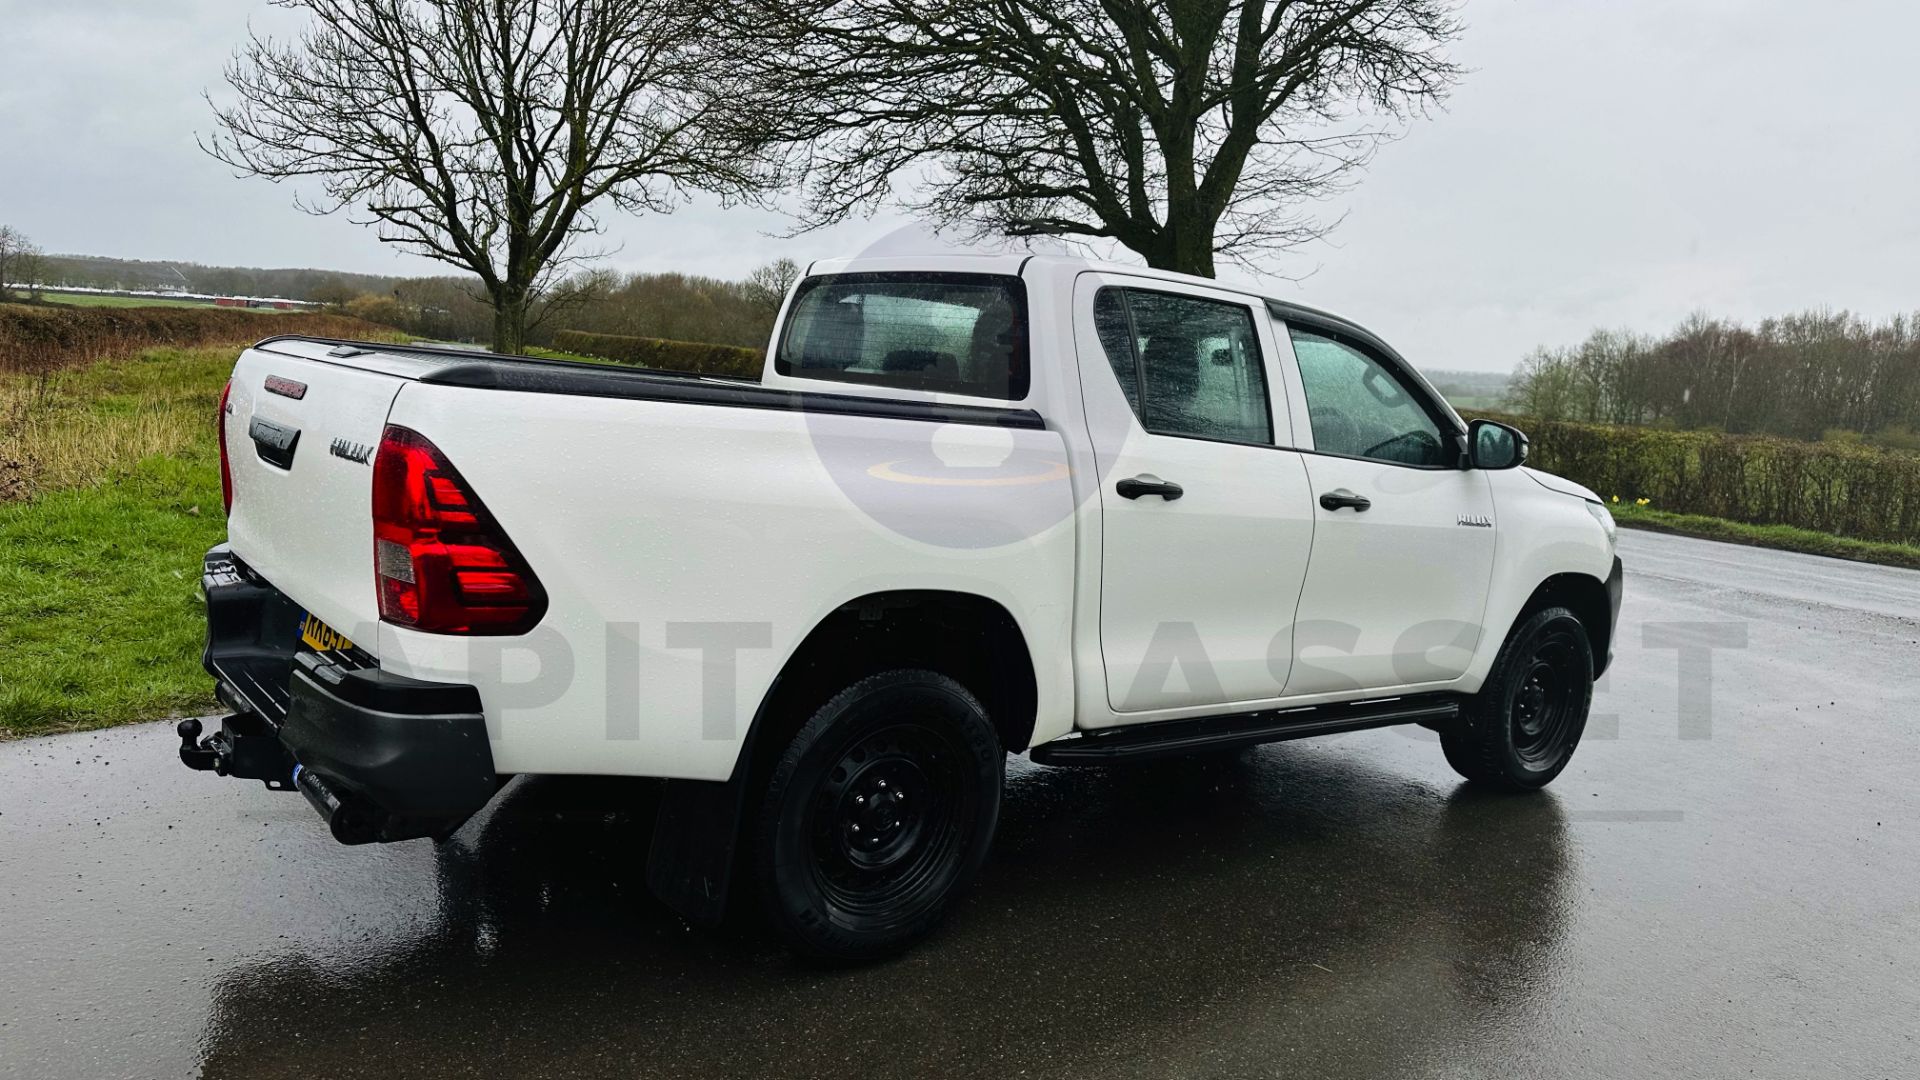 TOYOTA HILUX *DOUBLE CAB PICK-UP* (2020 - EURO 6) 2.4 D-4D - AUTO STOP/START *AIR CON* (1 OWNER) - Image 17 of 48